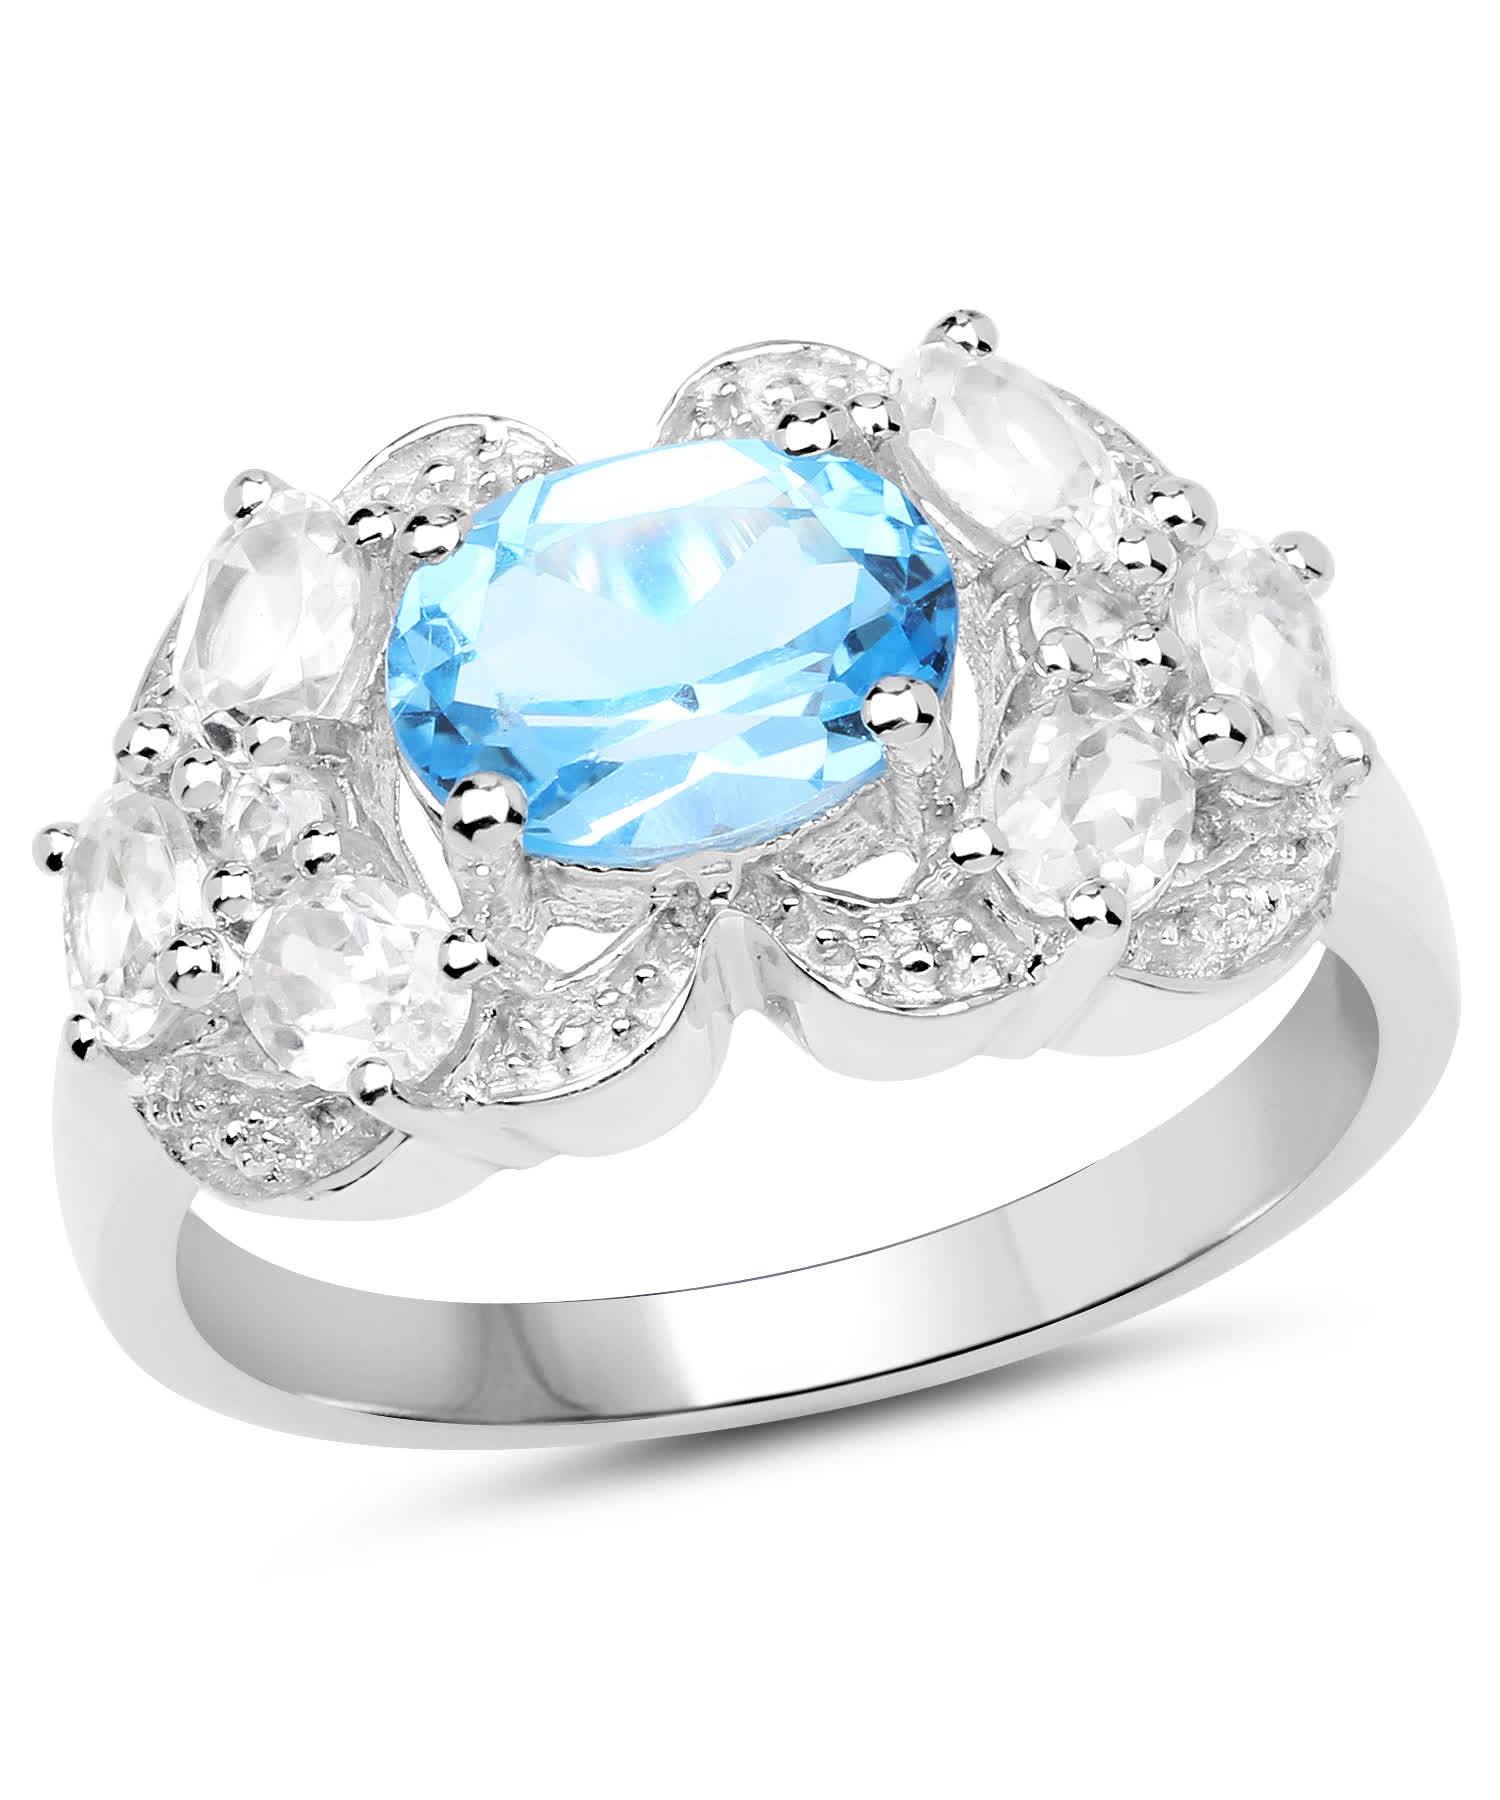 3.20ctw Natural Sky Blue Topaz and Zircon Rhodium Plated 925 Sterling Silver Ring View 1